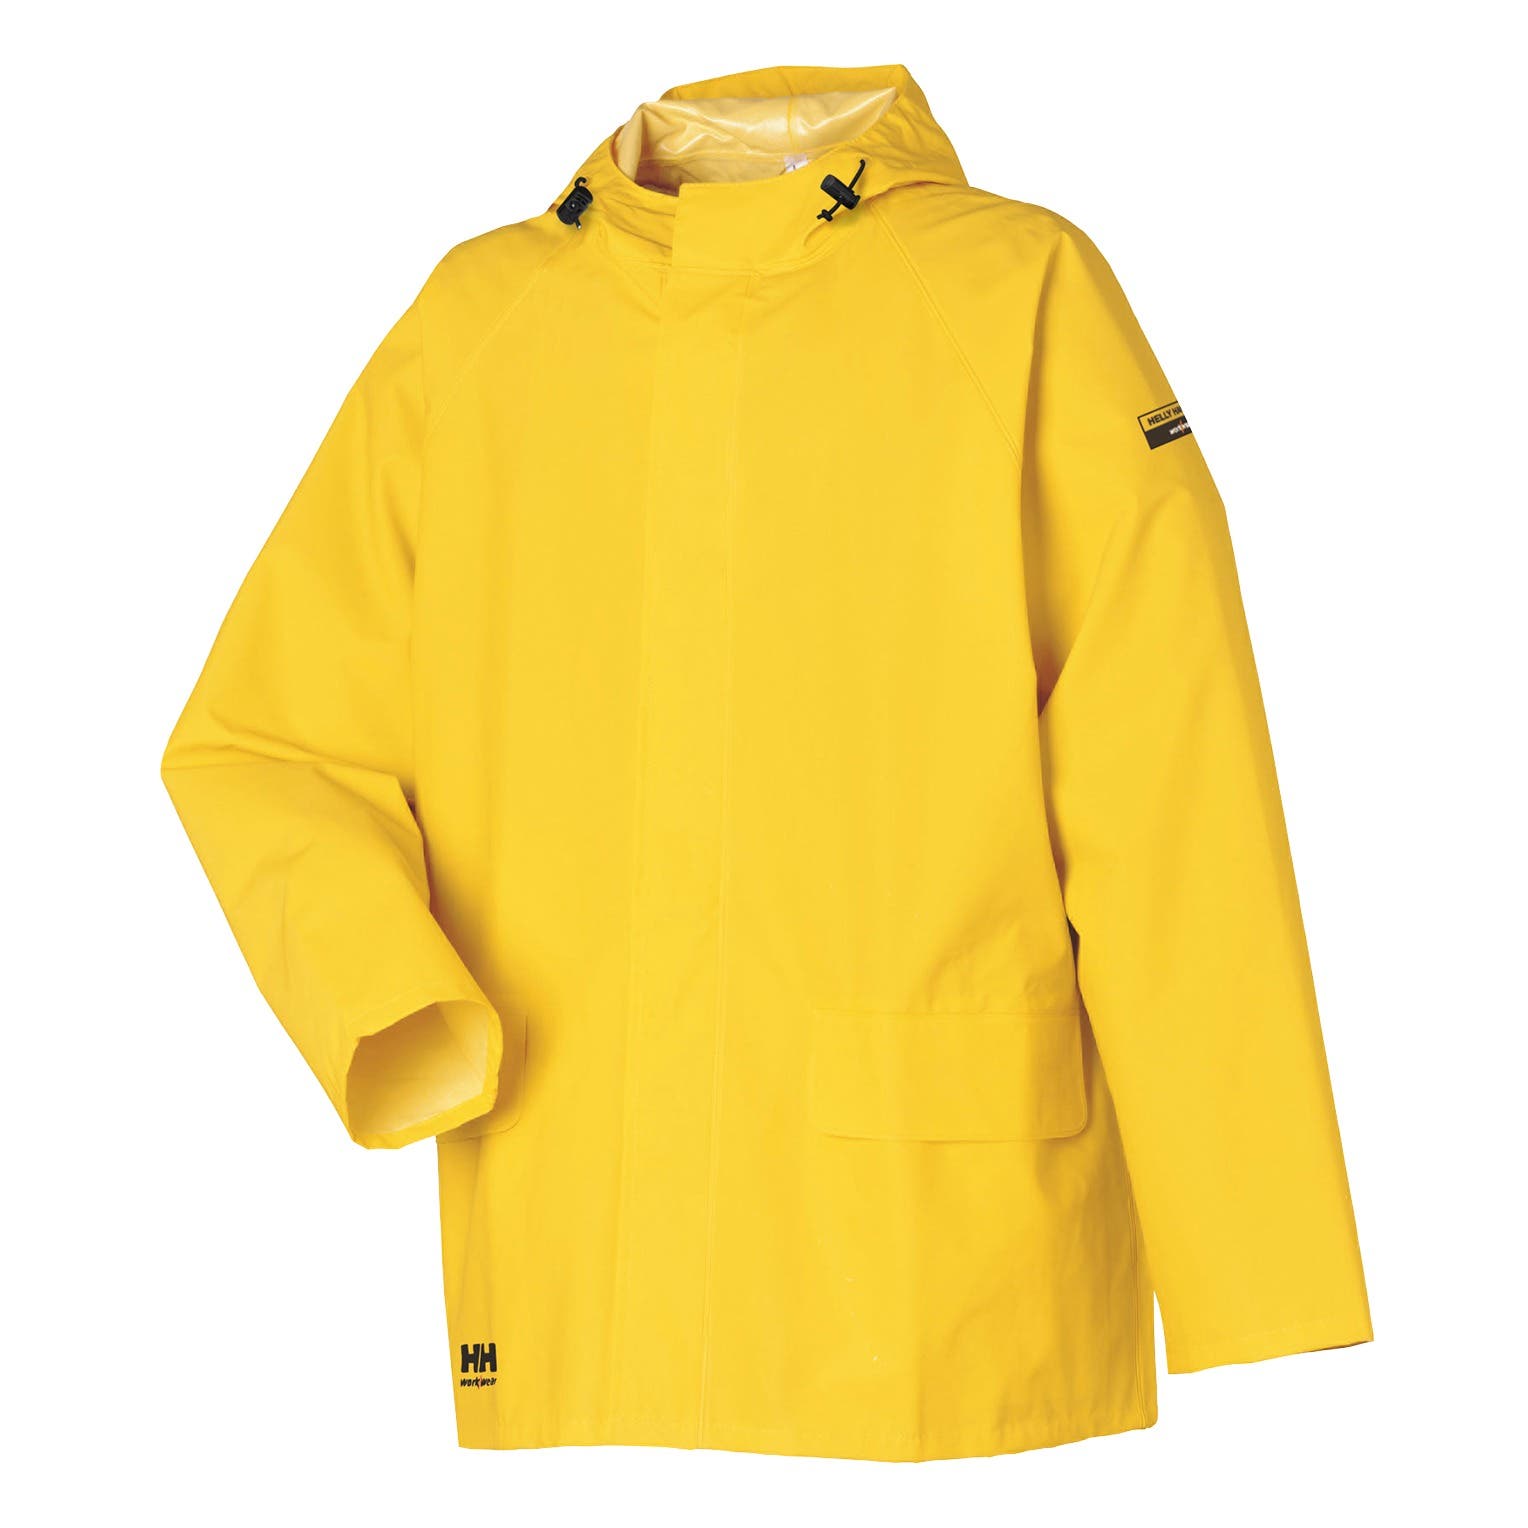 Helly Hansen Men's Mandal Rain Jacket in Light Yellow from the front